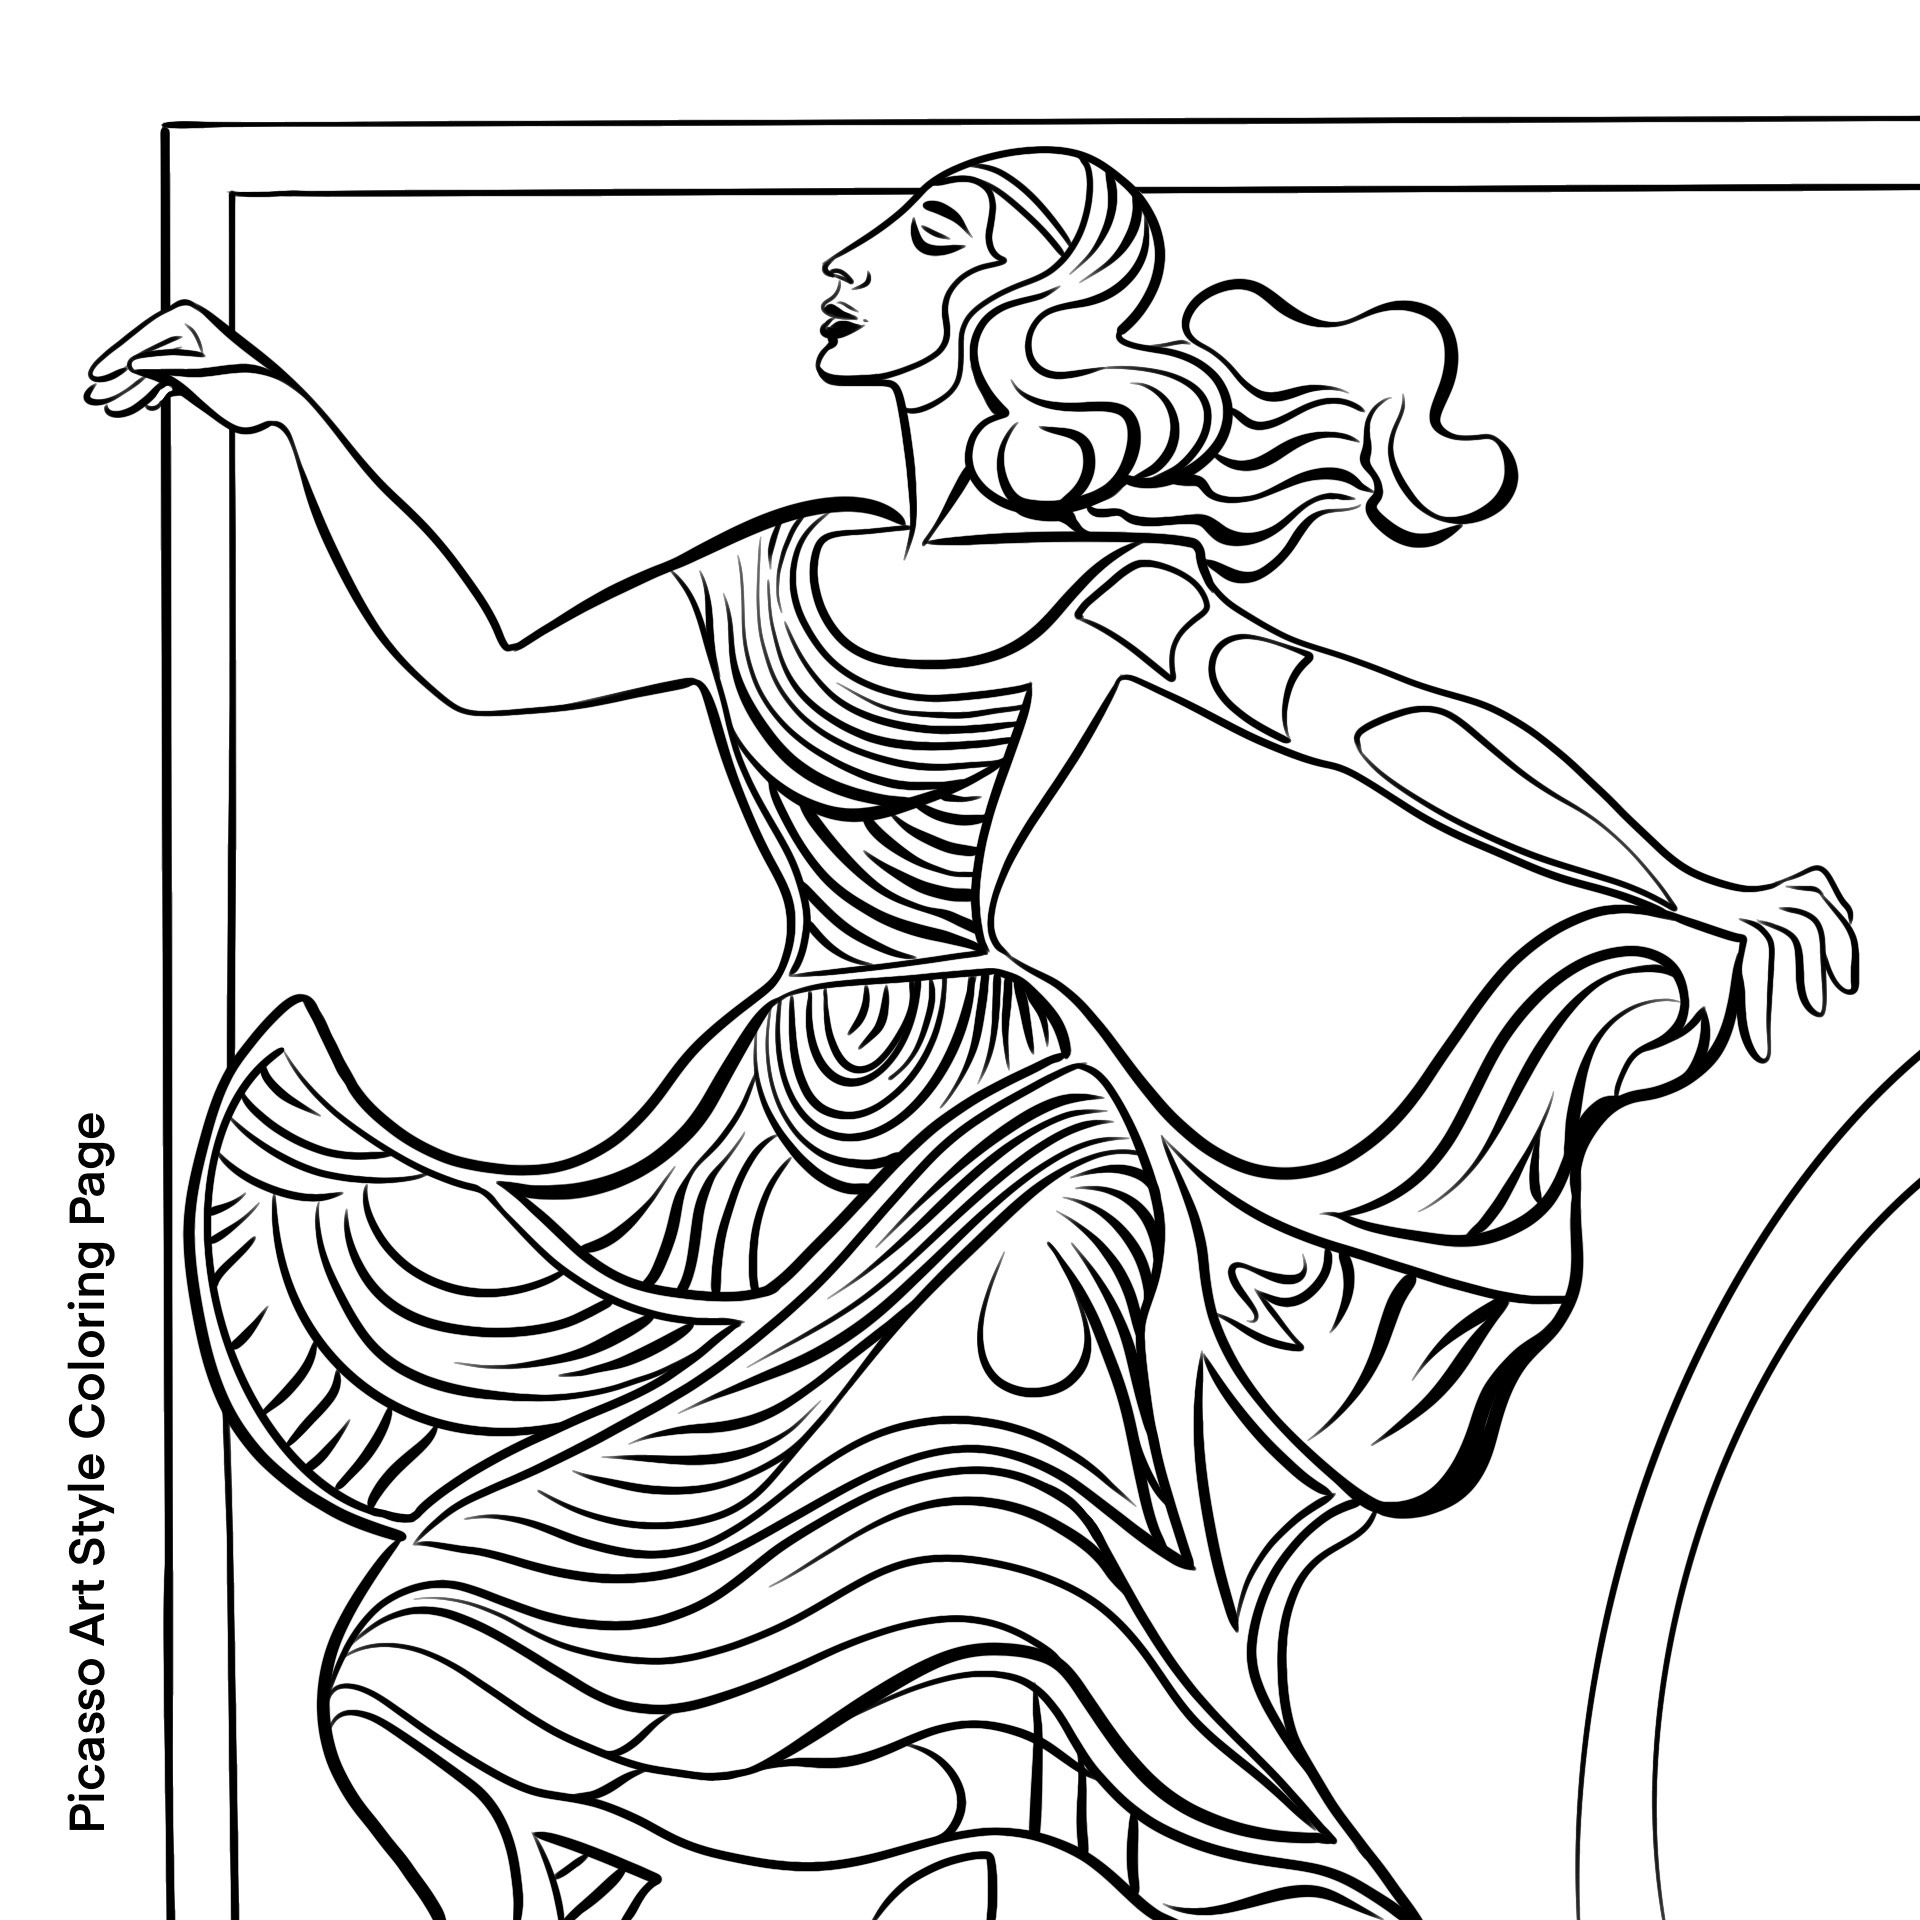 painting book coloring pages - photo #36